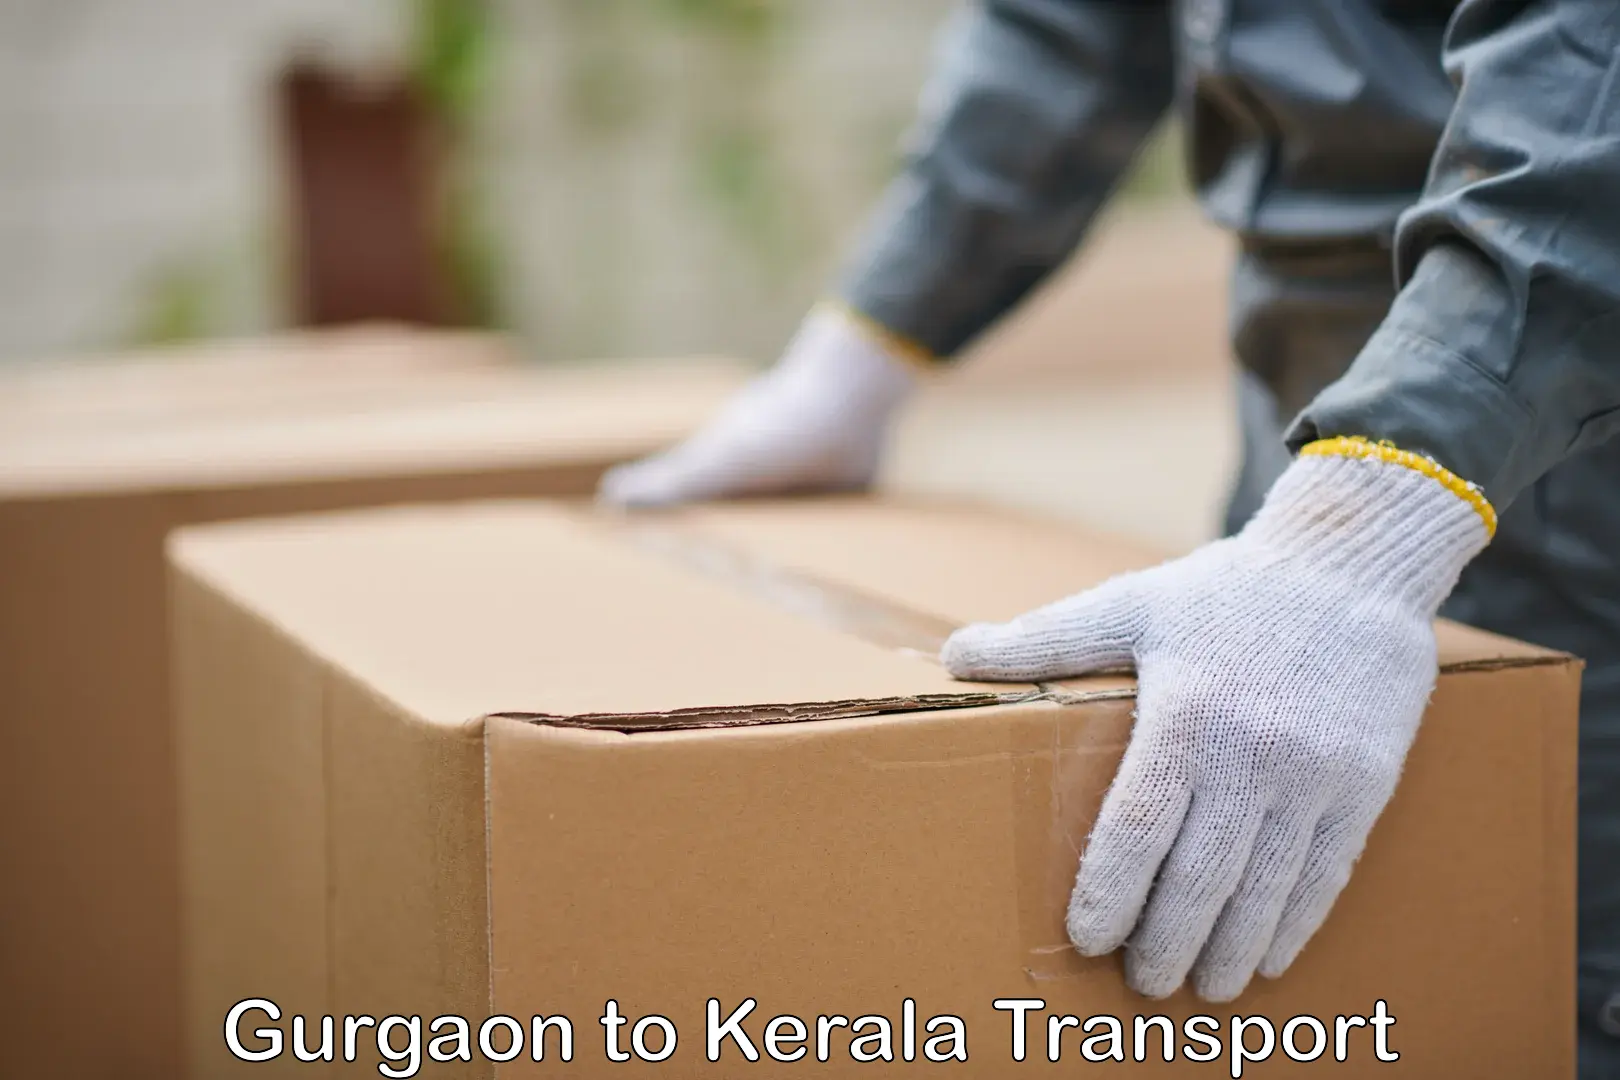 Online transport service Gurgaon to Parappa